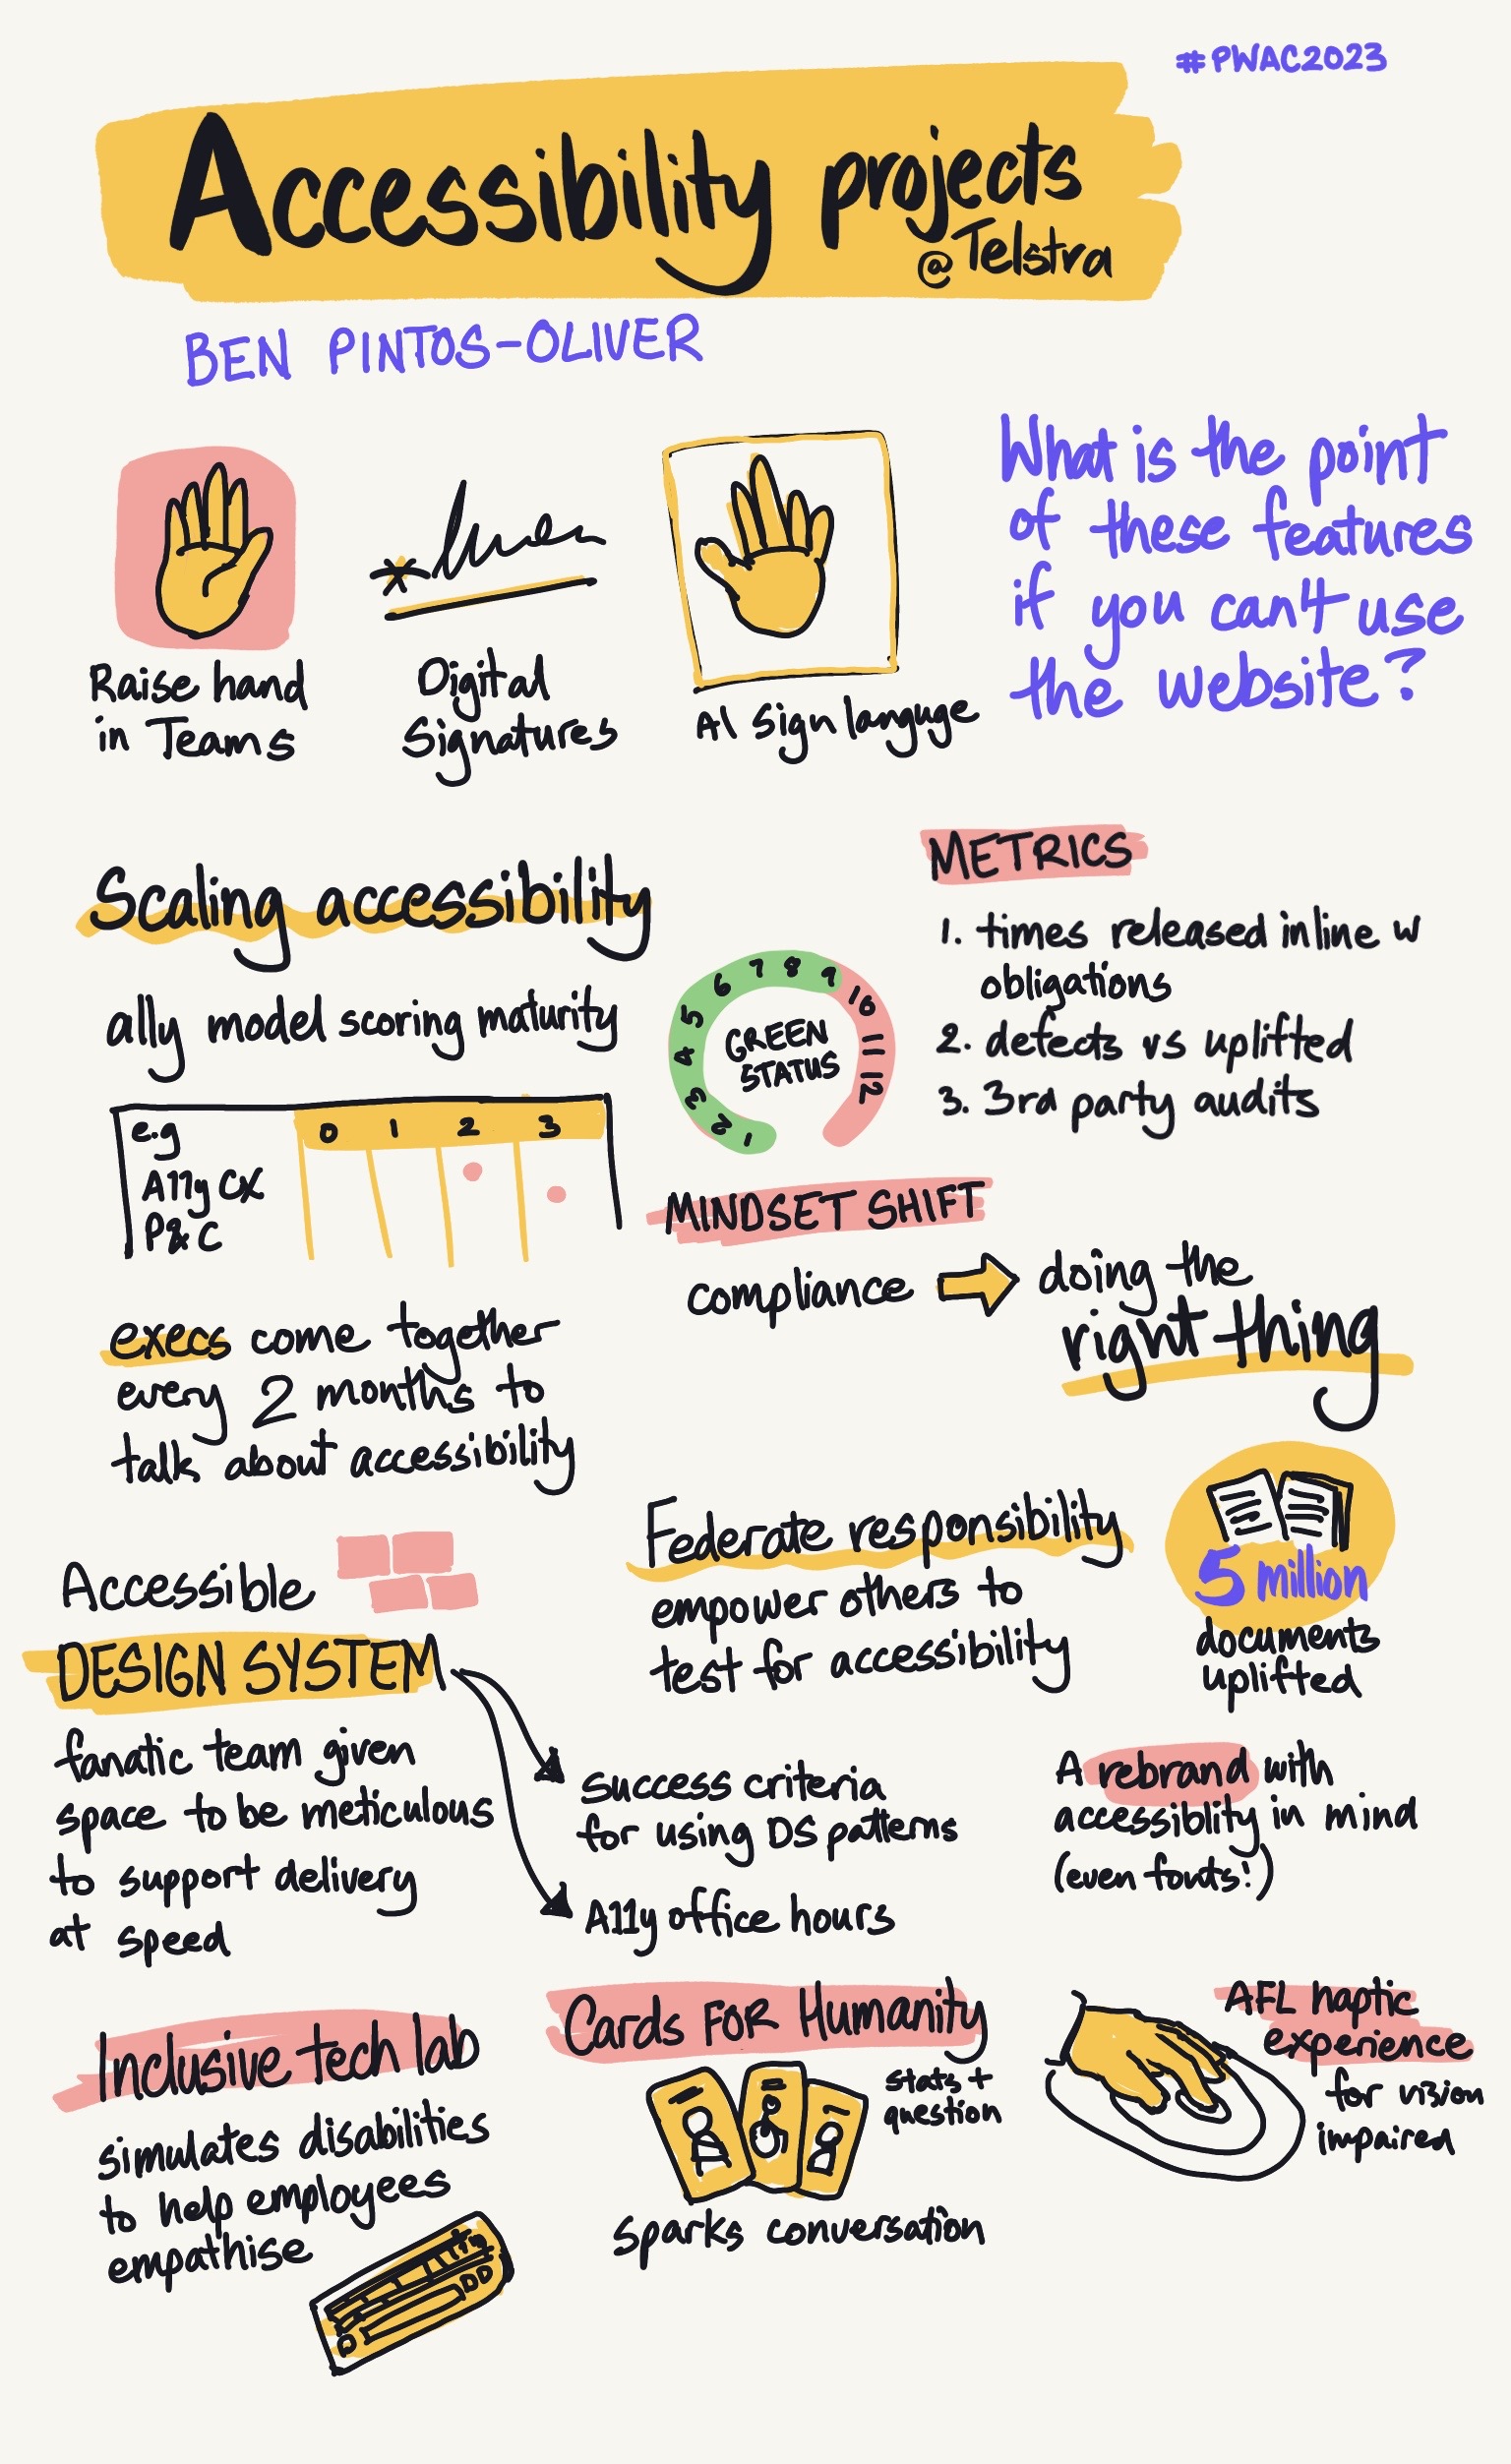 sketchnote of Accessibility projects at Telstra, a talk by Ben Pintos-Oliver